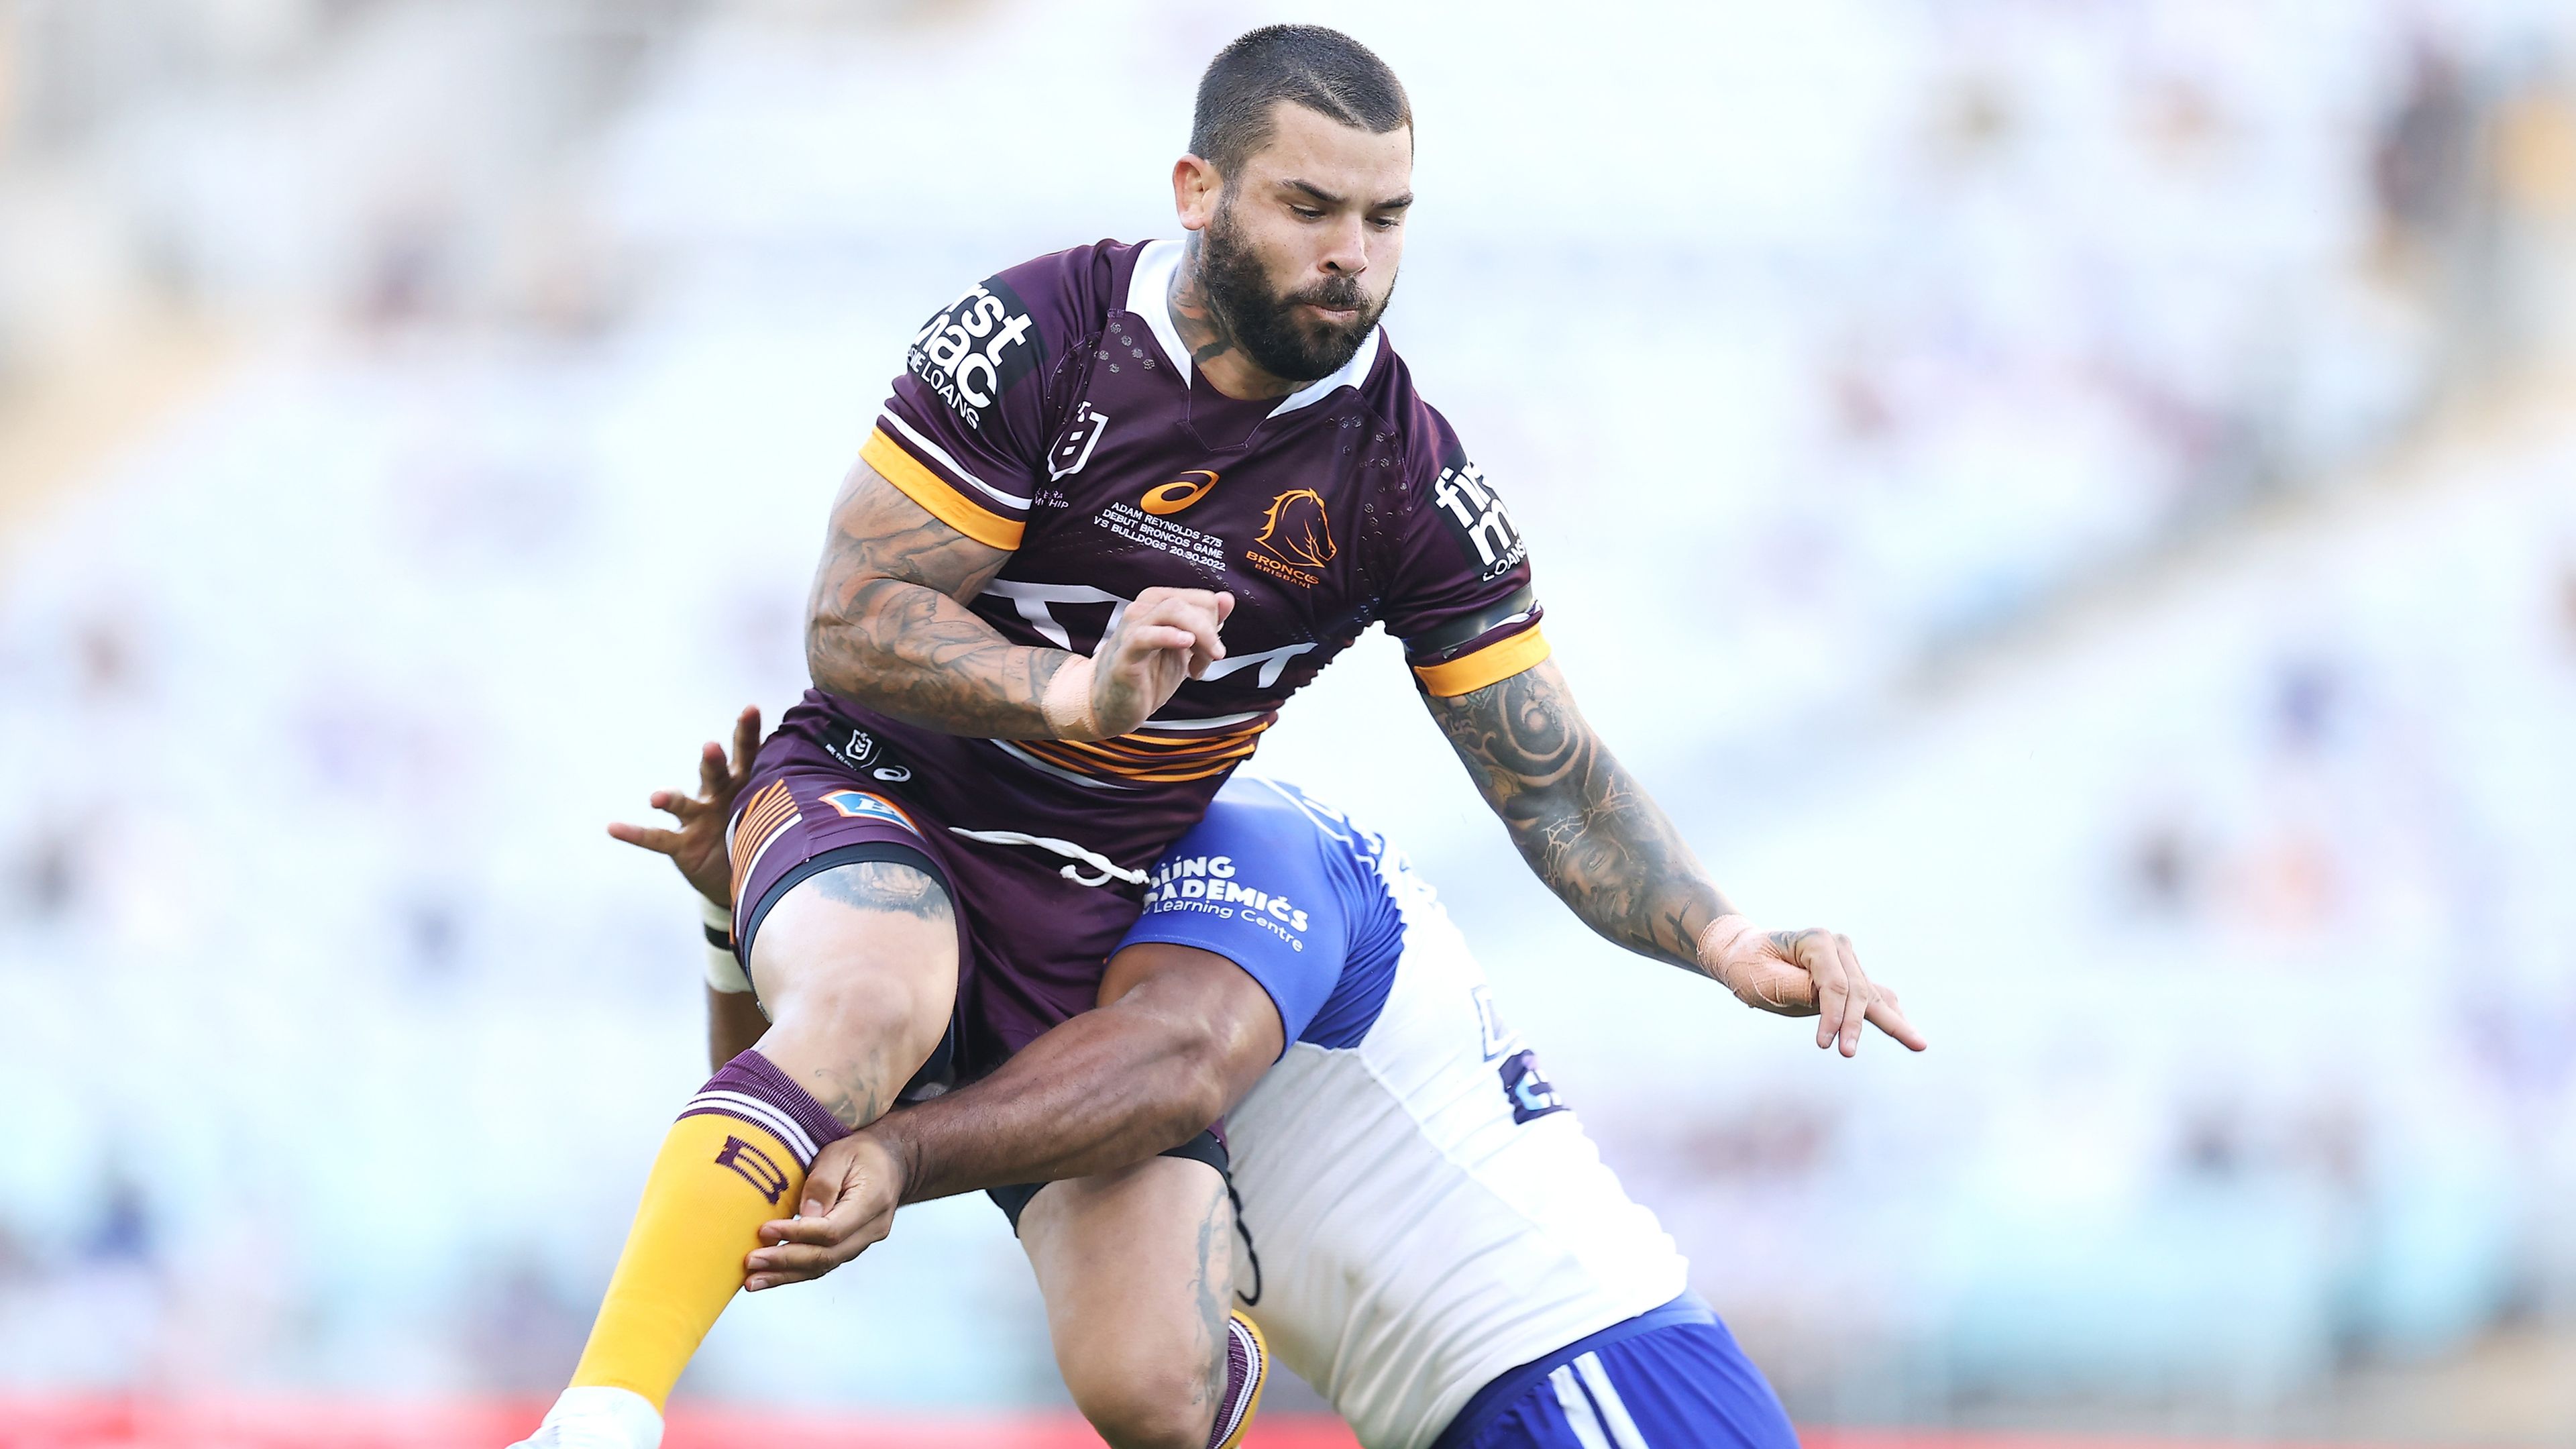 Bulldogs' Tevita Pangai Junior reported in Broncos clash after heated tackle